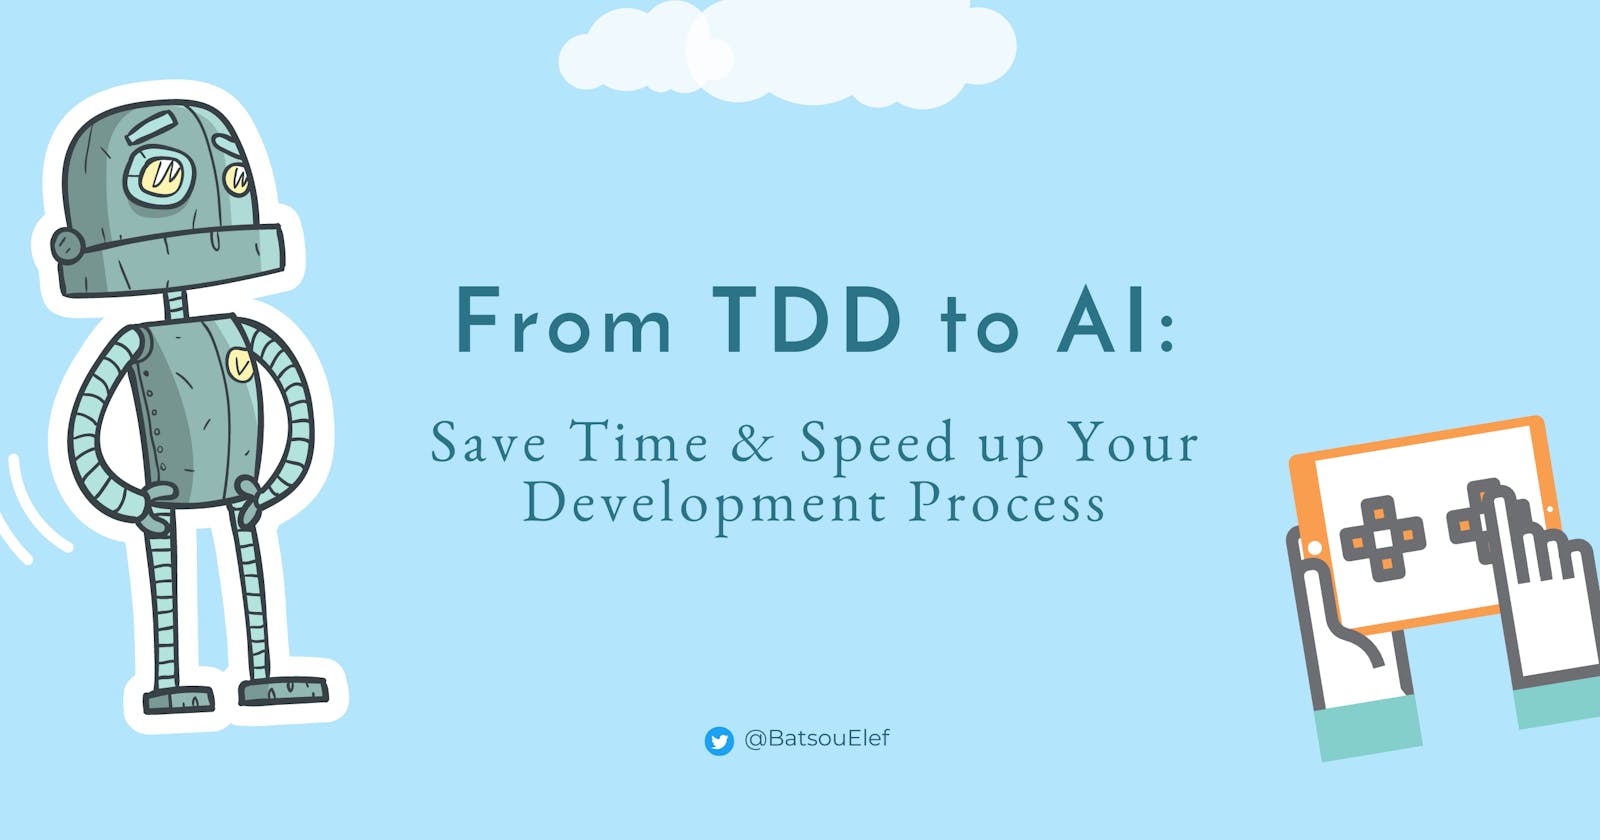 From TDD to AI: Techniques & Tools for Devs, Save Time & Speed up Your Development Process